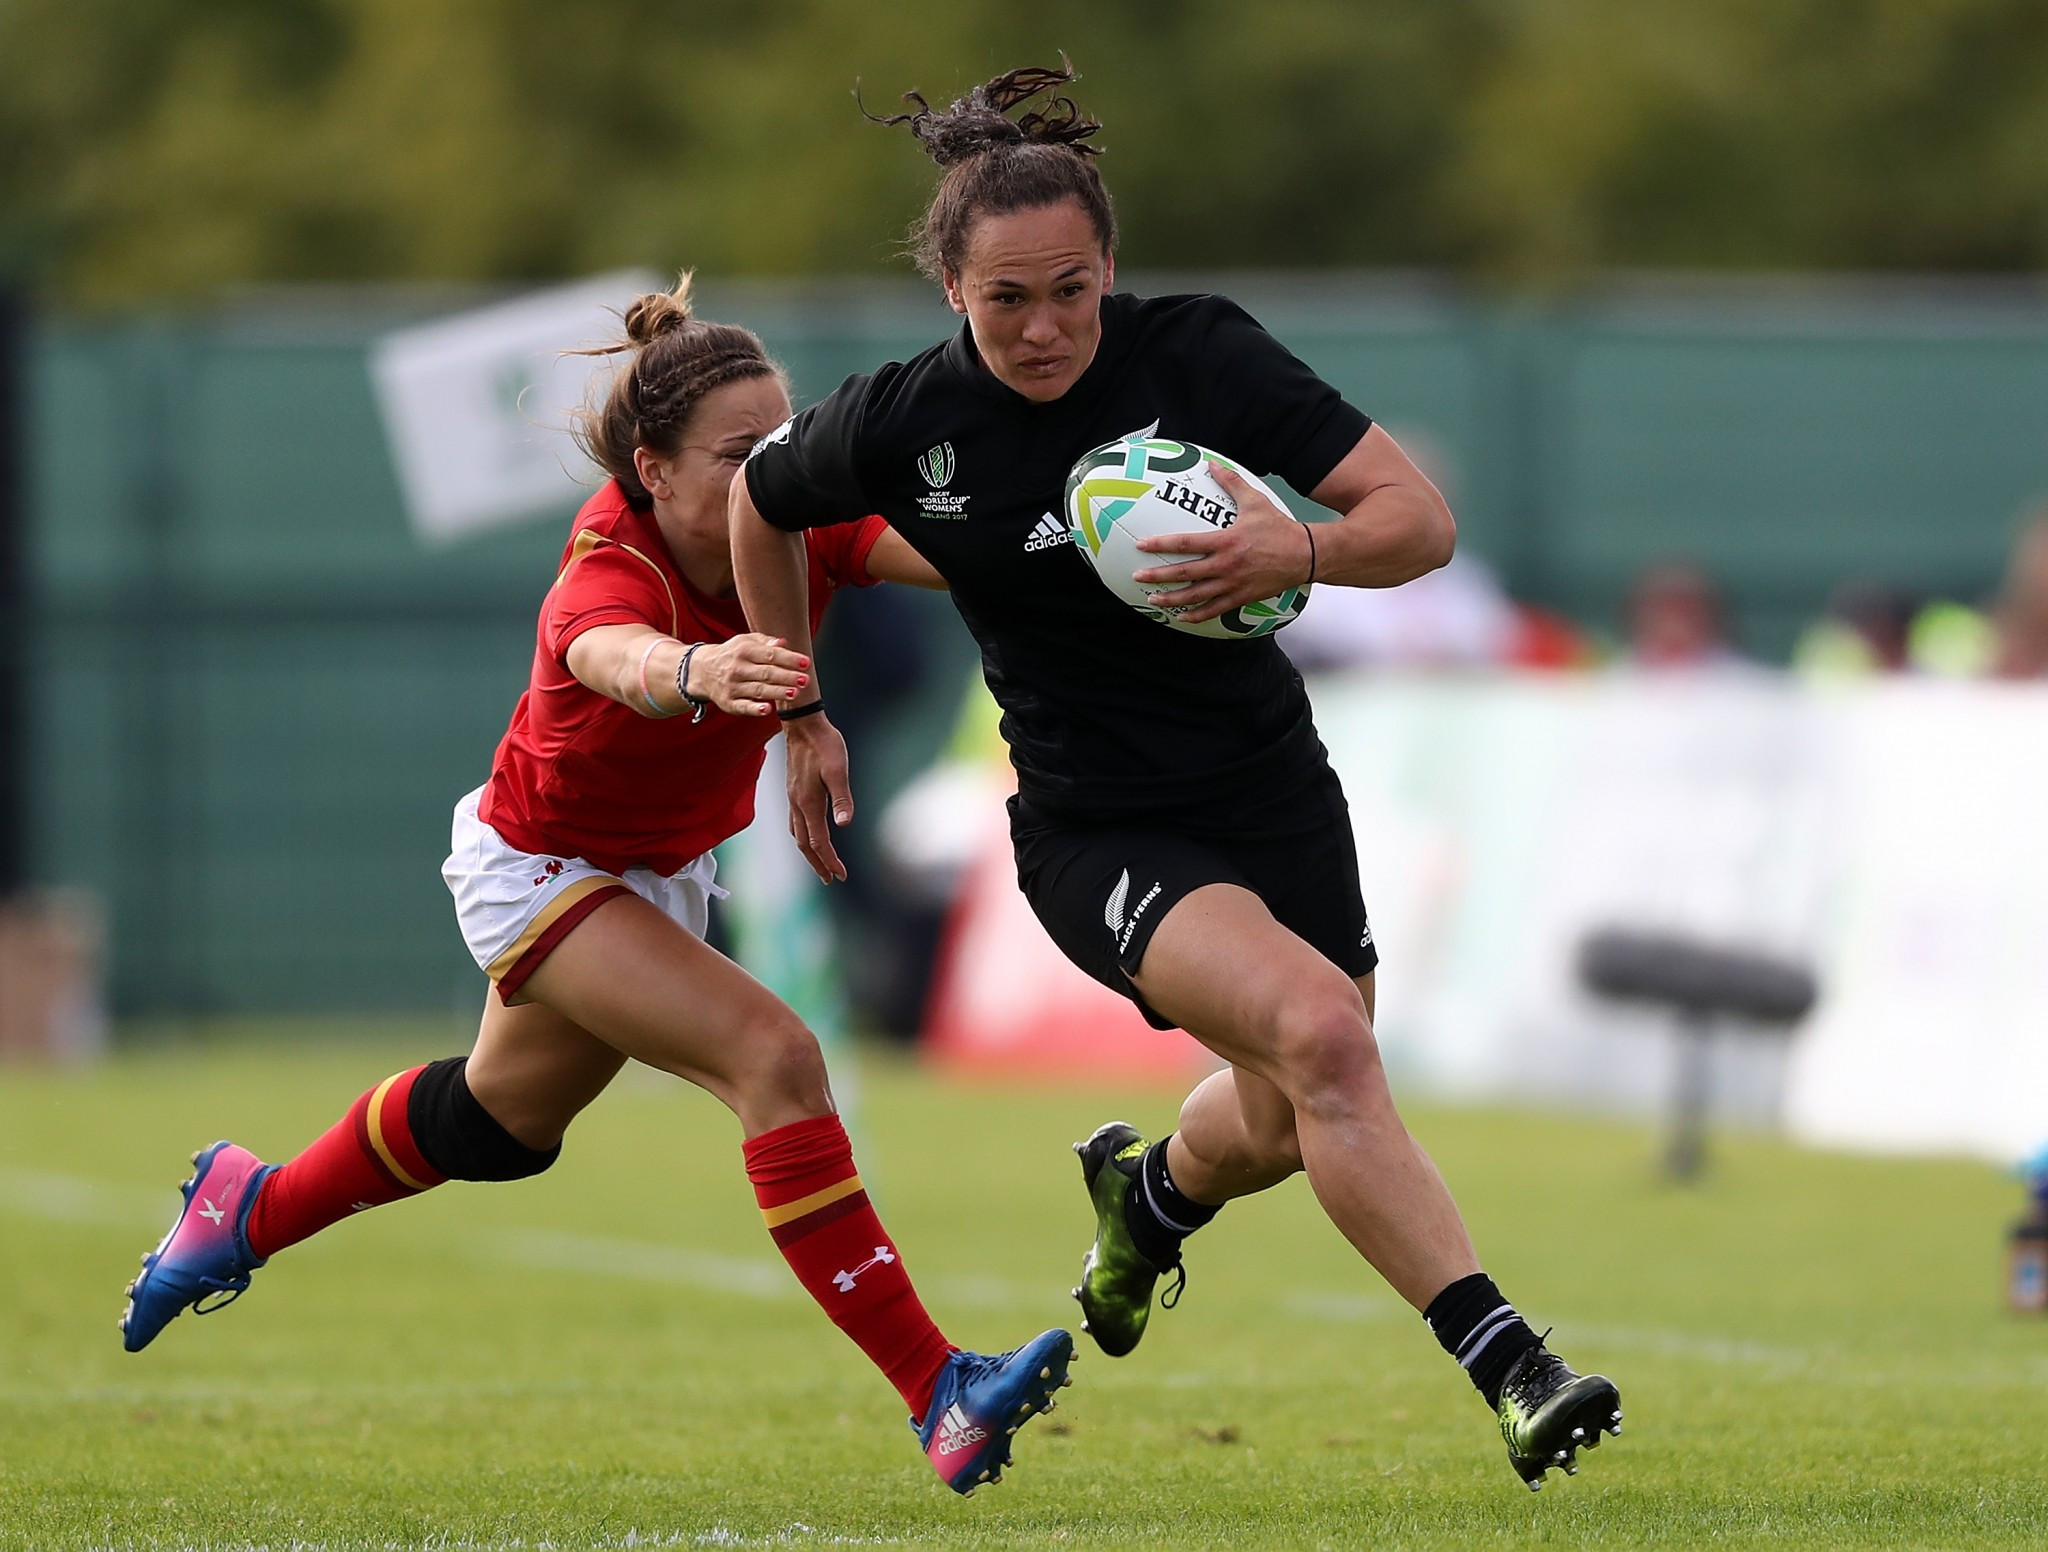 New Zealand overcame Wales 44-12 in Pool A ©Getty Images